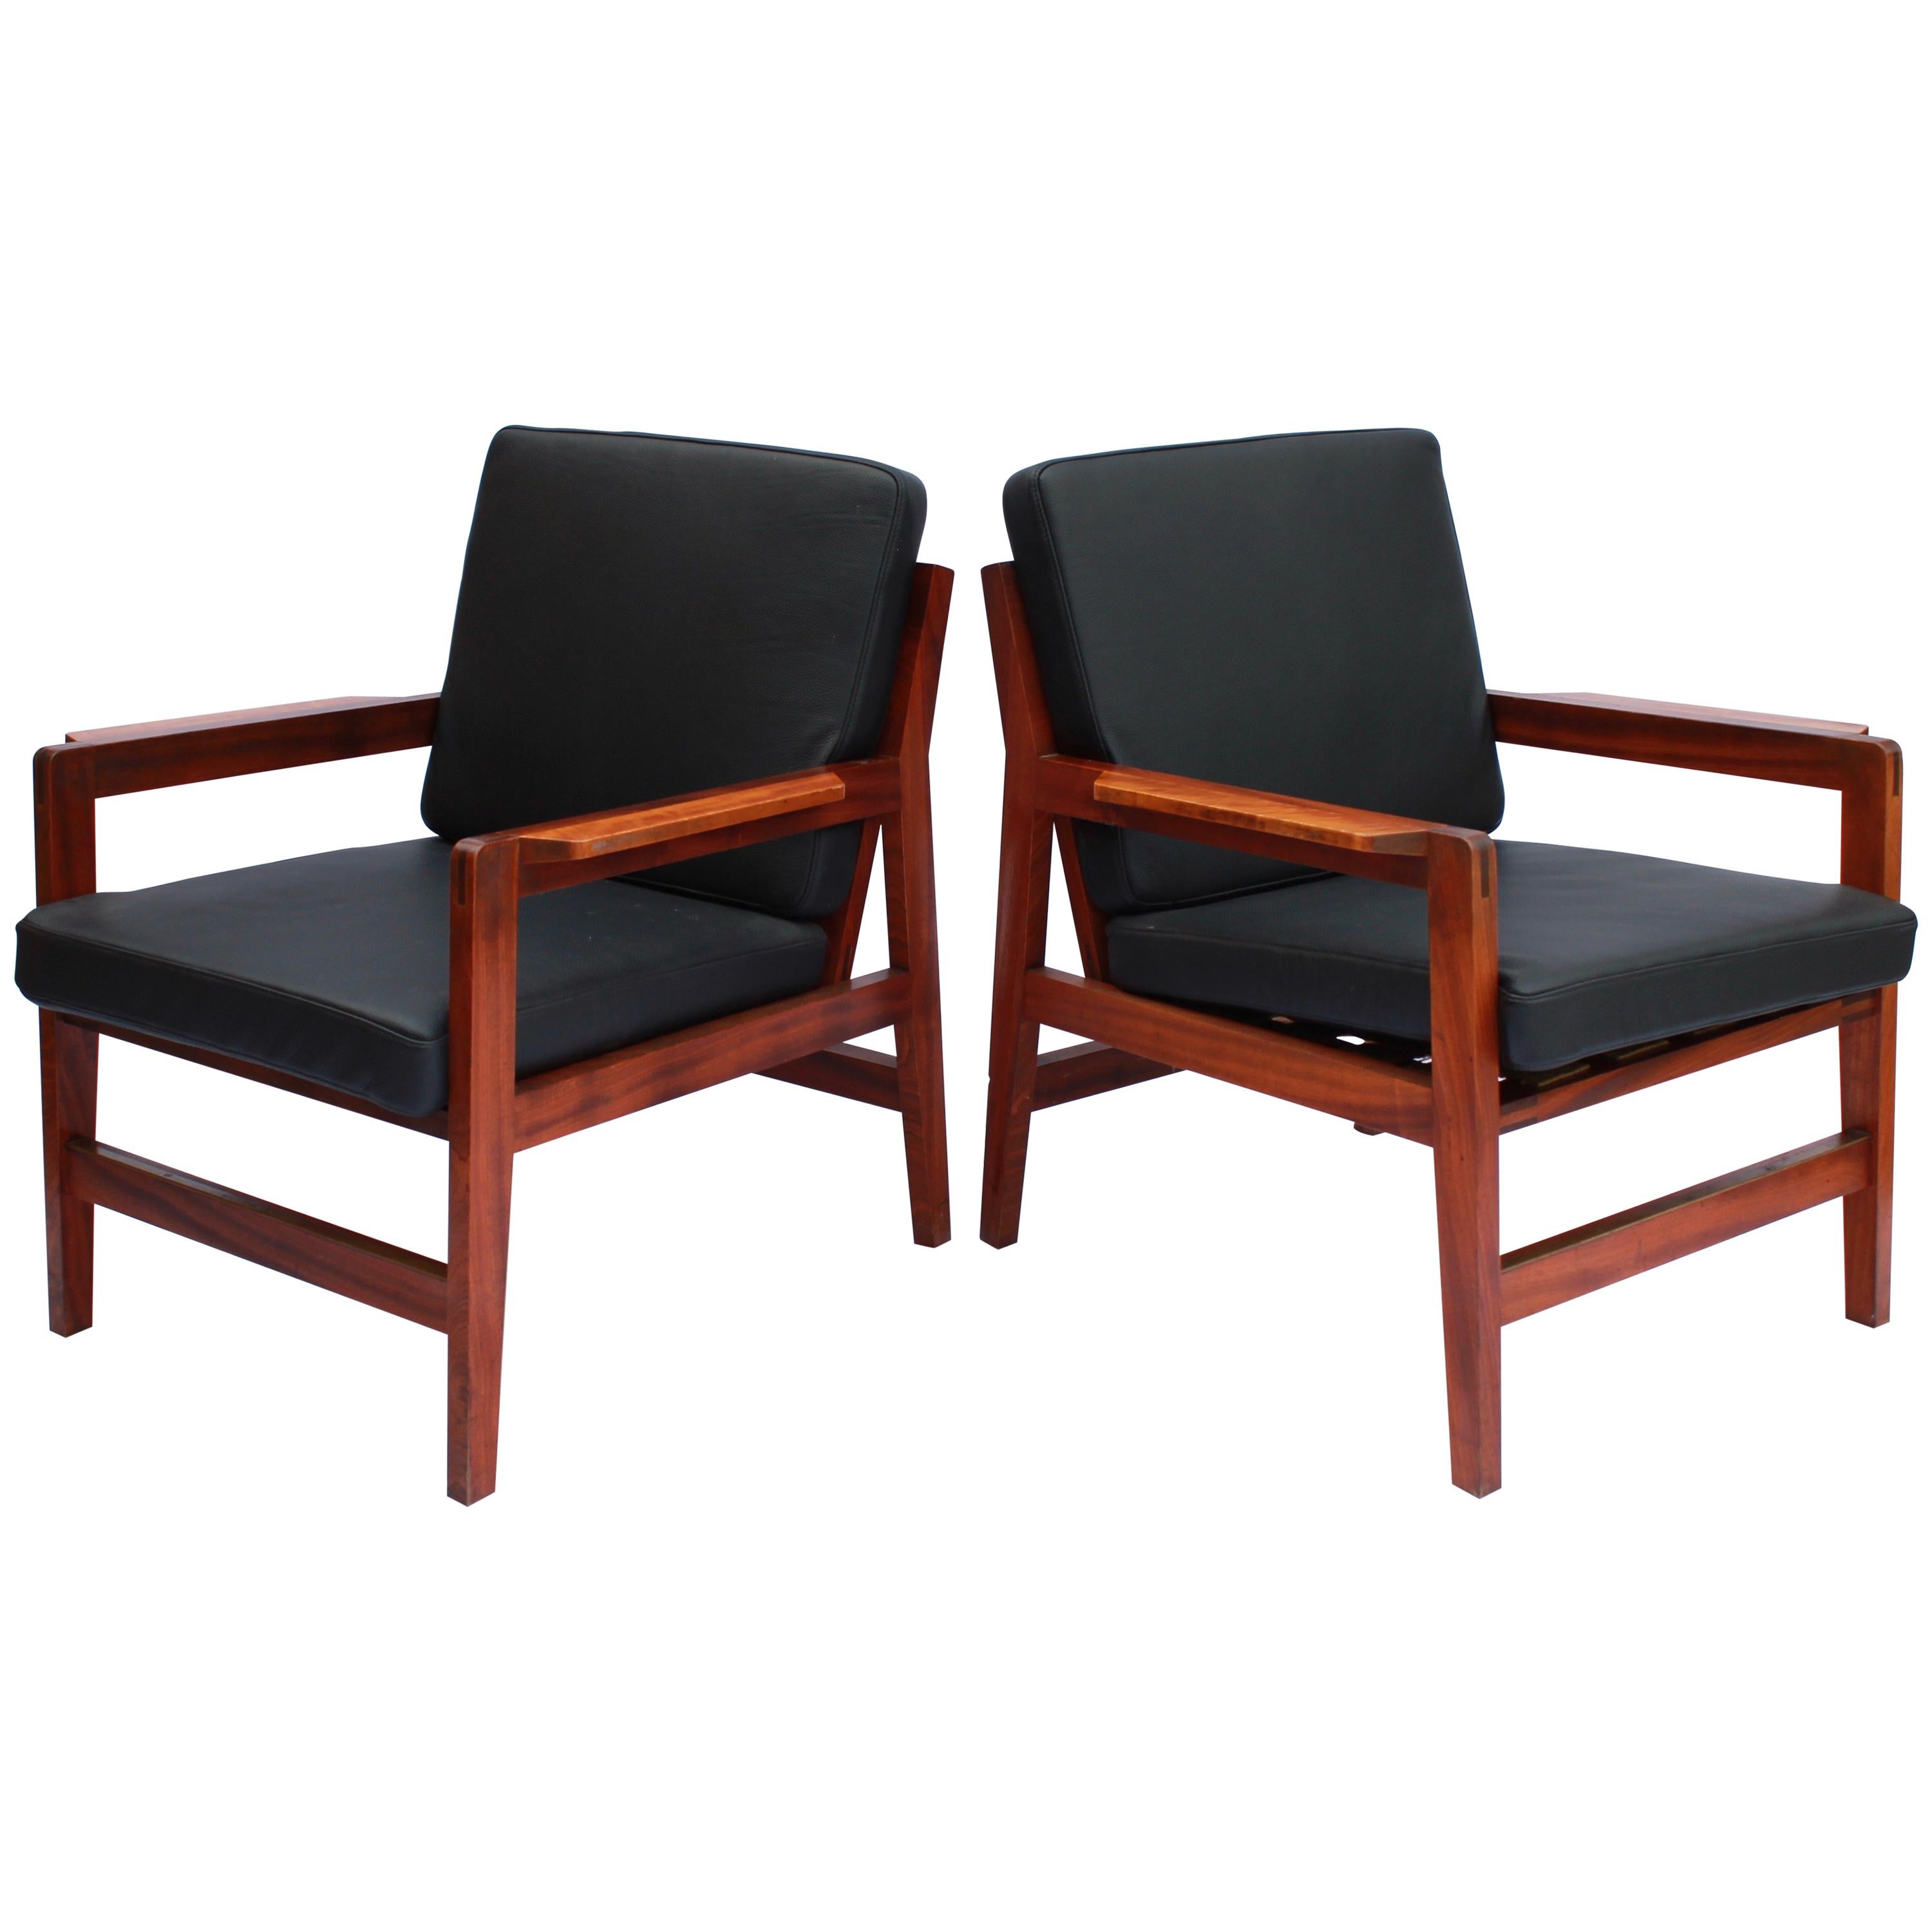 Pair of Lounge Chairs in Polished Wood of Danish Design, 1960s